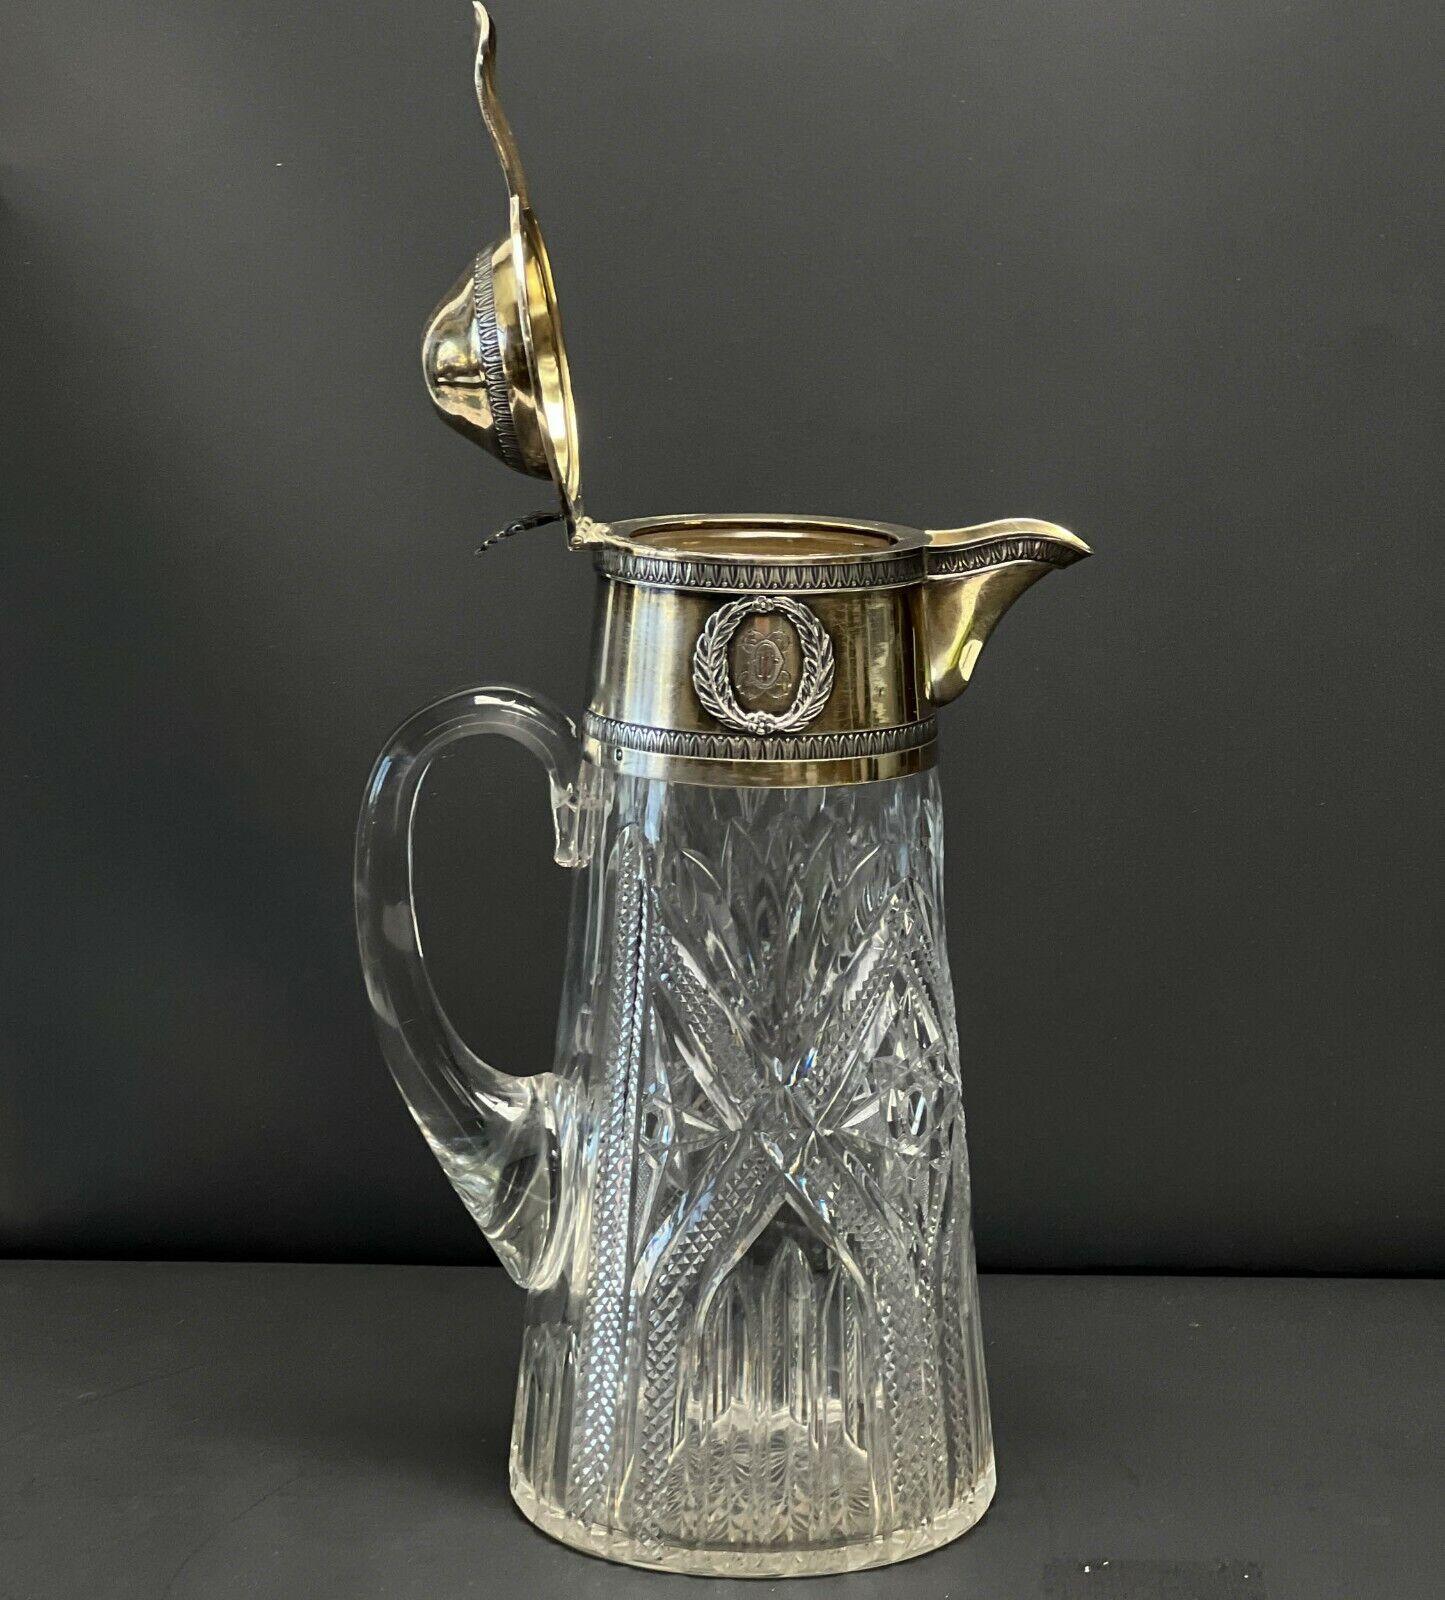 Auguste Leroy & Cie France Gilt 950 silver mounted cut glass Pitcher, circa 1920.

Cut glass star and fan design to the body. Gilt silver mounts with raised laurel wreath decoration framing a monogram to wither side. Hinged lid with seashell form